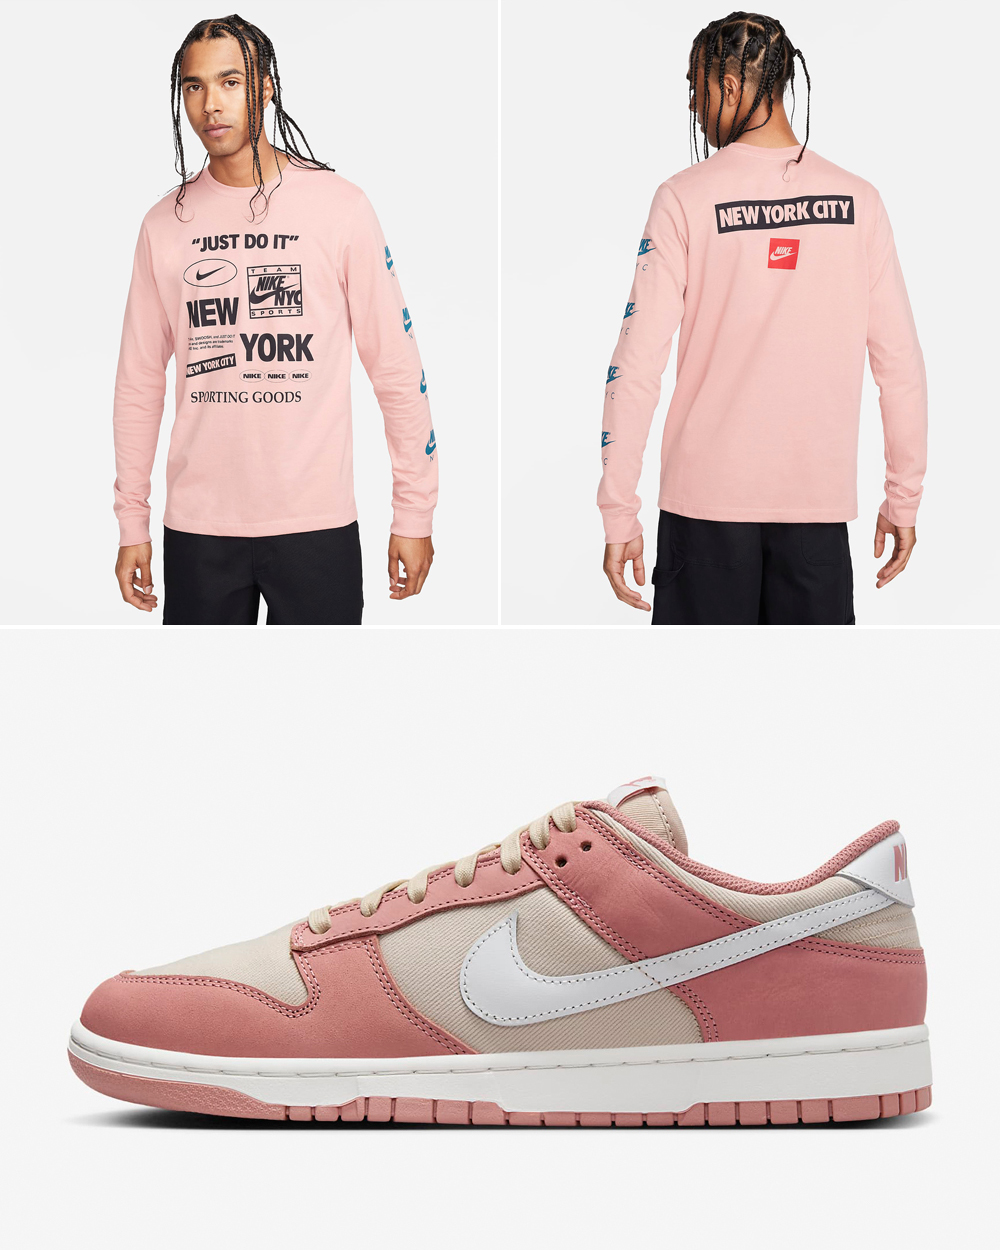 Nike-Dunk-Low-Red-Stardust-Shirt